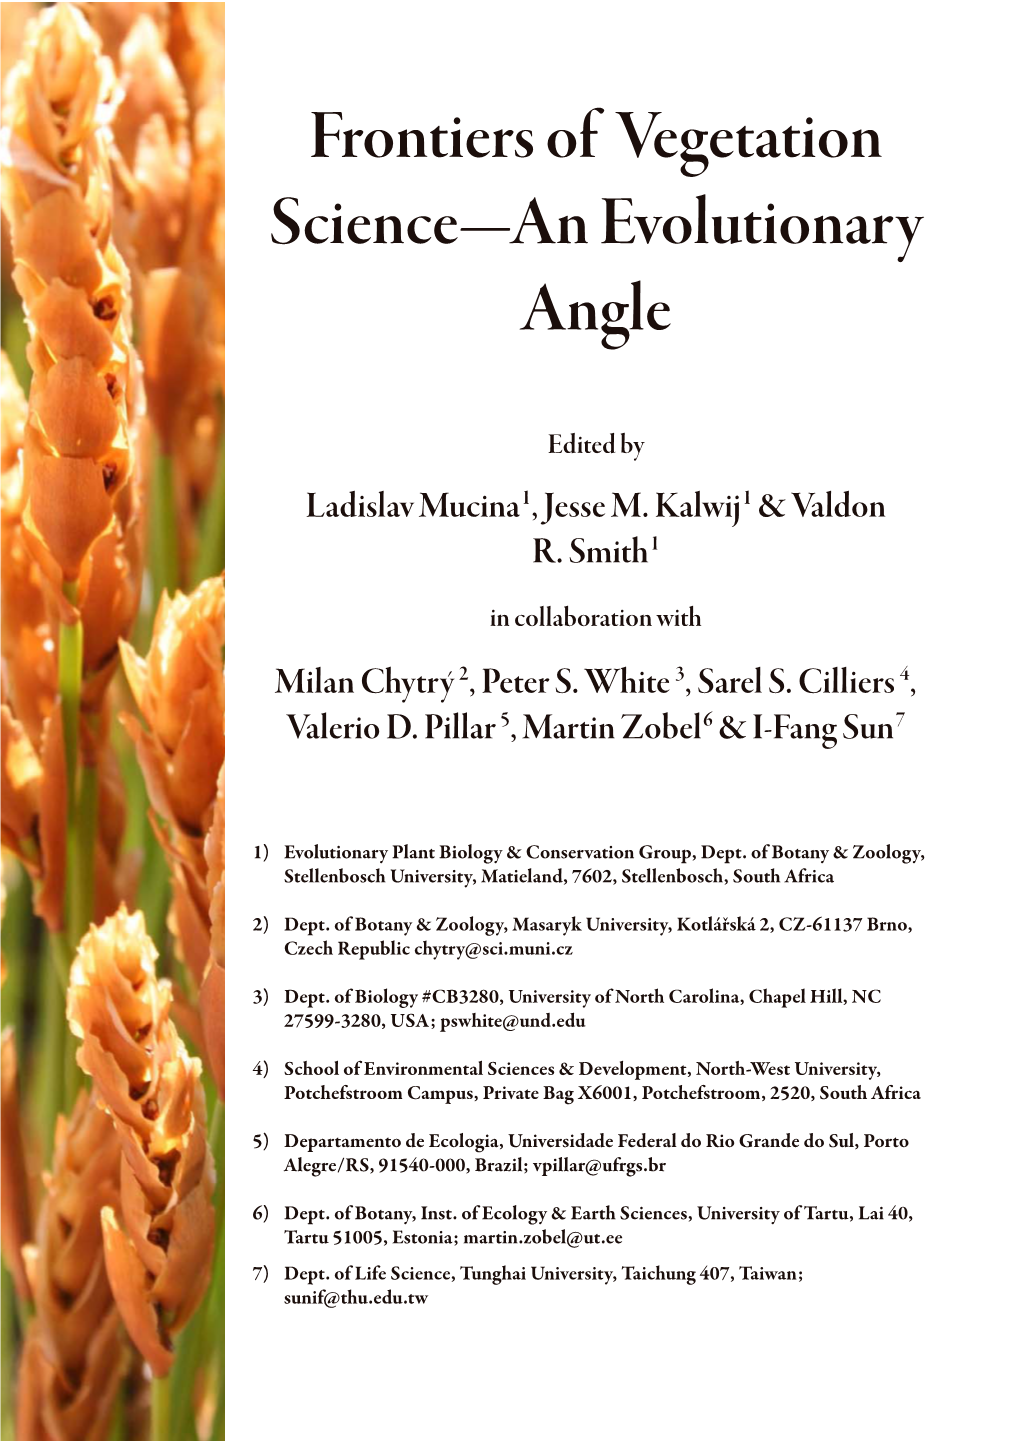 Frontiers of Vegetation Science—An Evolutionary Angle